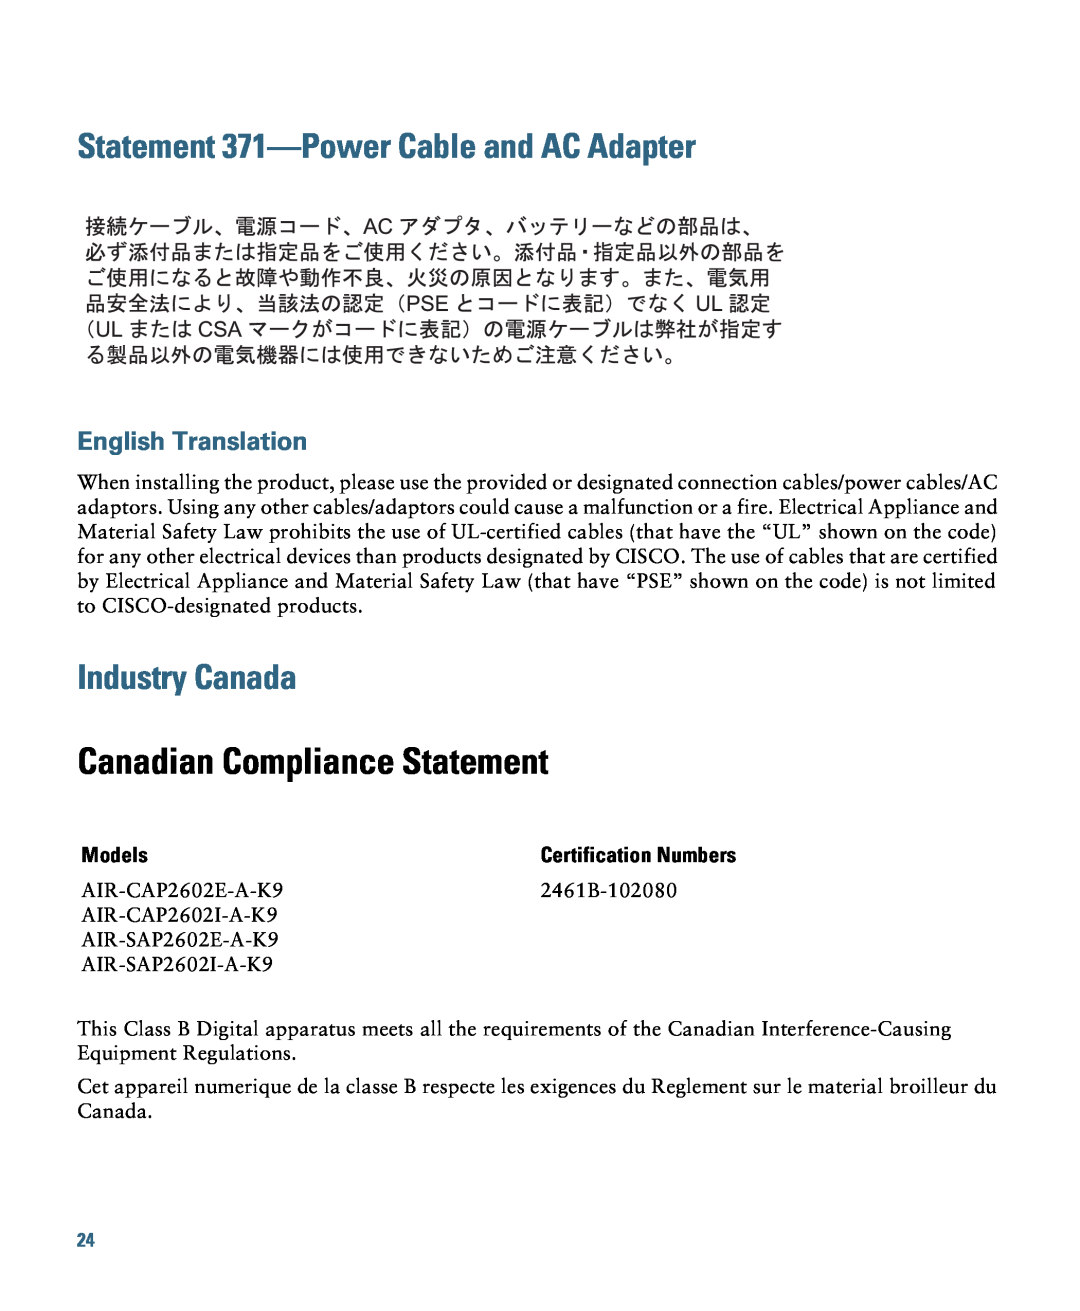 Cisco Systems AIRCAP2602IAK910 Statement 371-Power Cable and AC Adapter, Industry Canada, Canadian Compliance Statement 